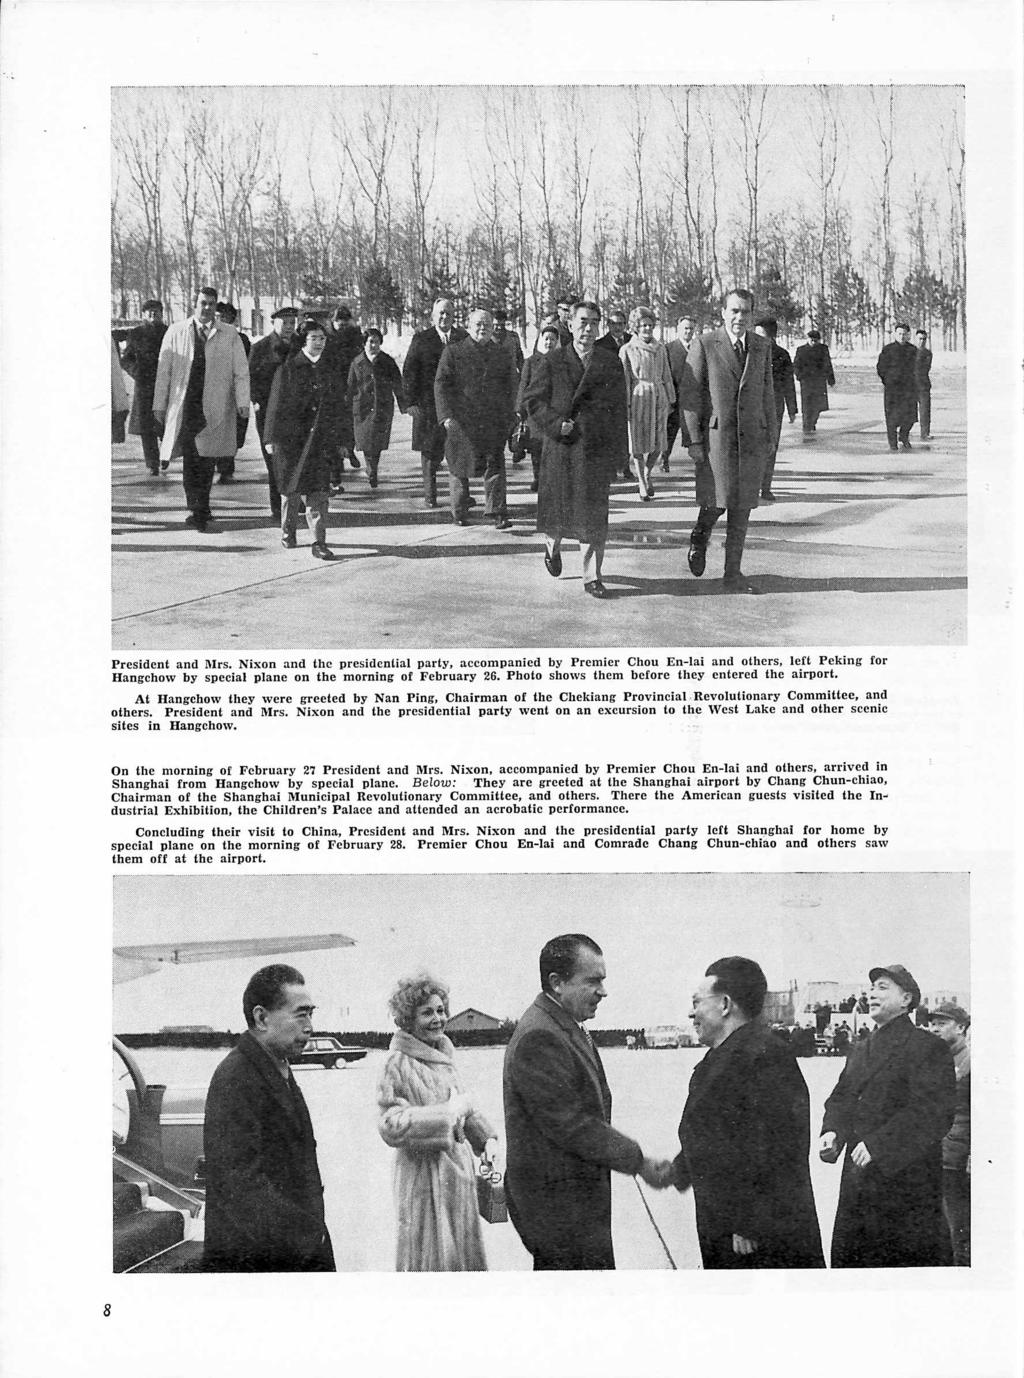 President and Mrs. Nixon and the presidential party, accompanied by Premier Chou En-lai and others, left Peking for Hangcbow by special plane on the morning of February 26.